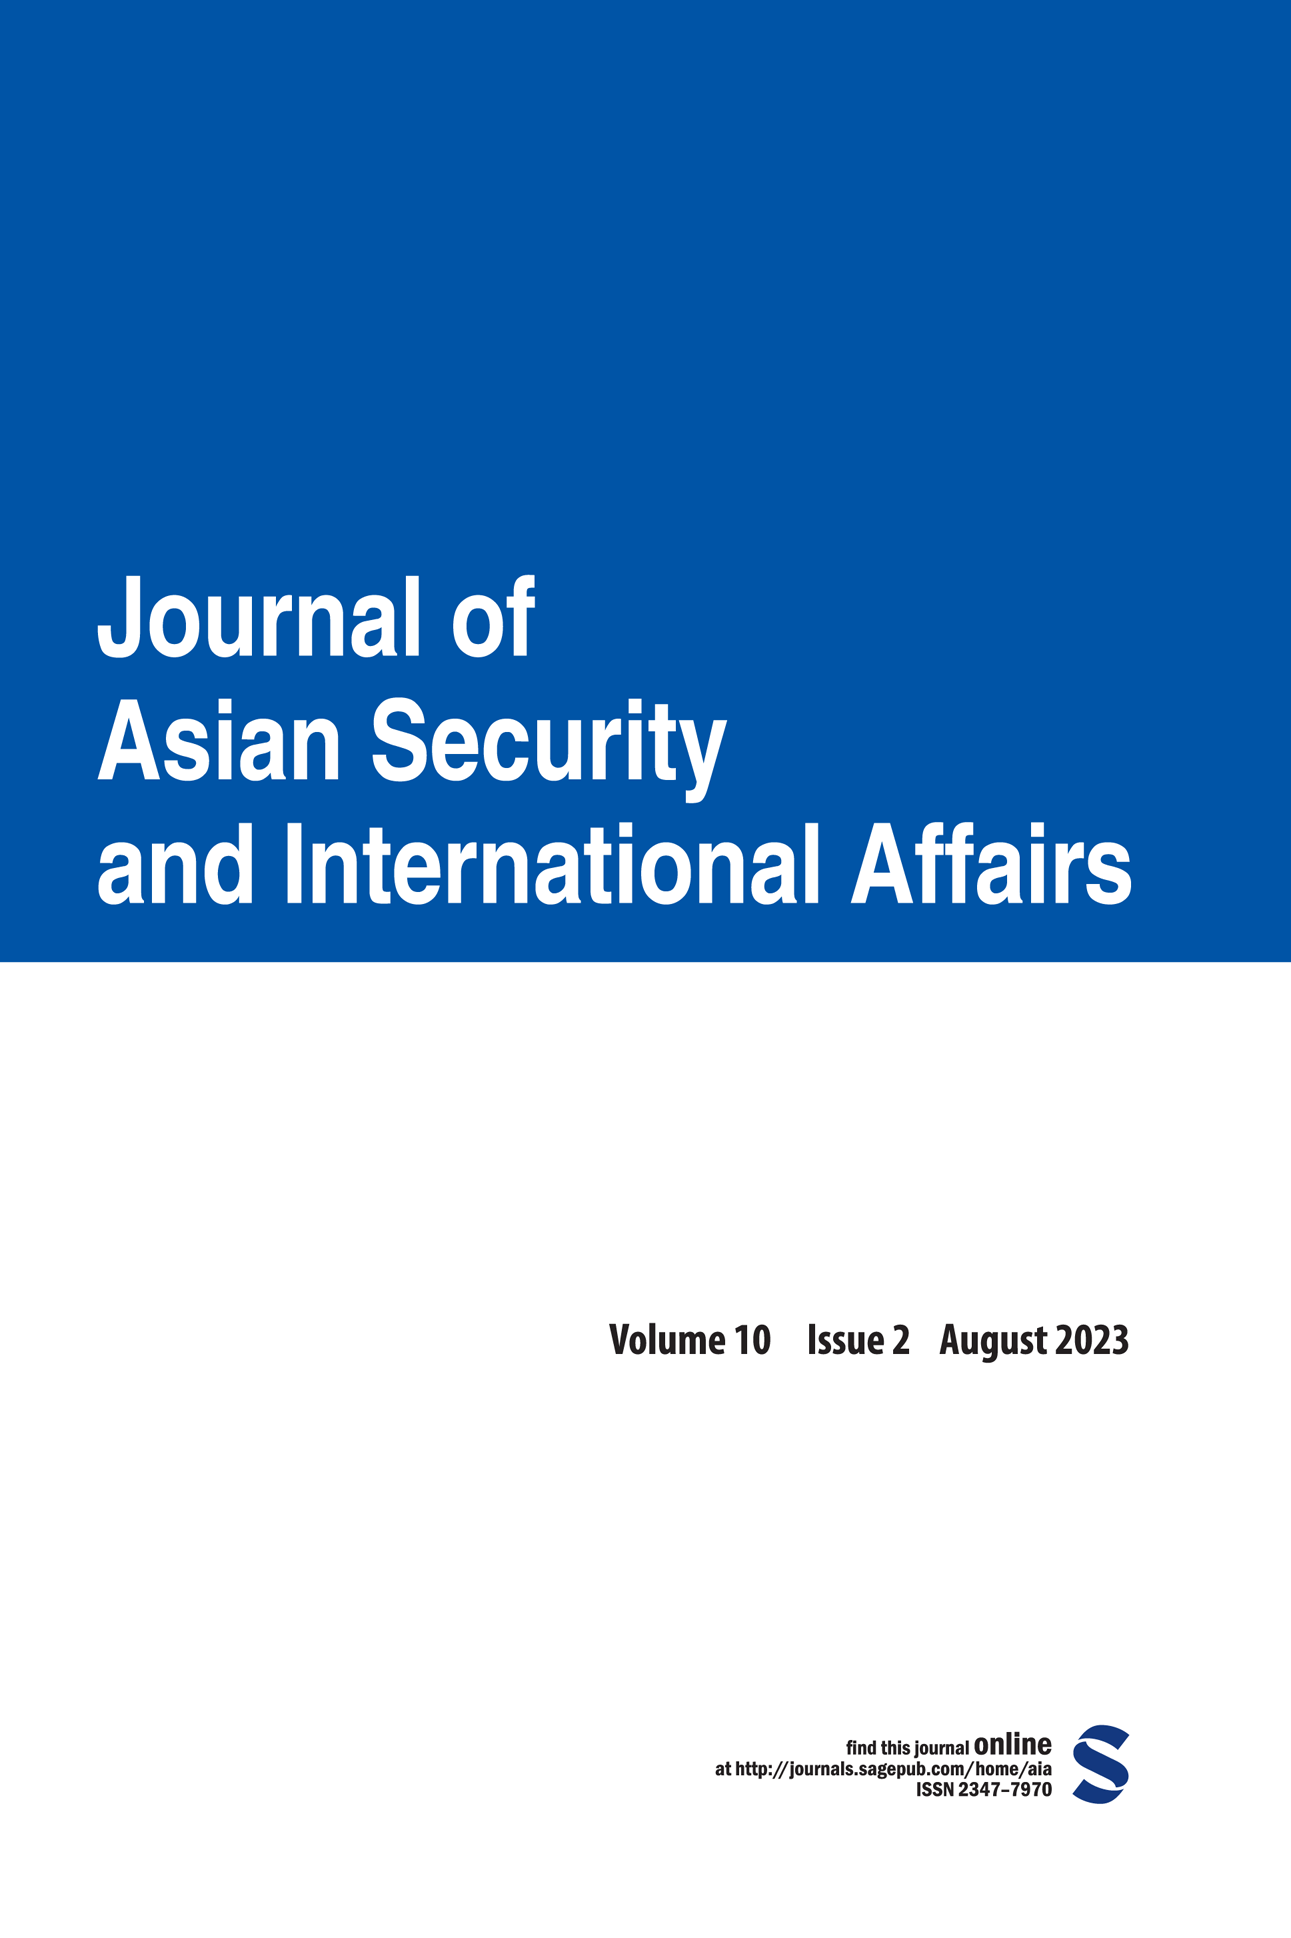 Journal of Asian security and international affairs.